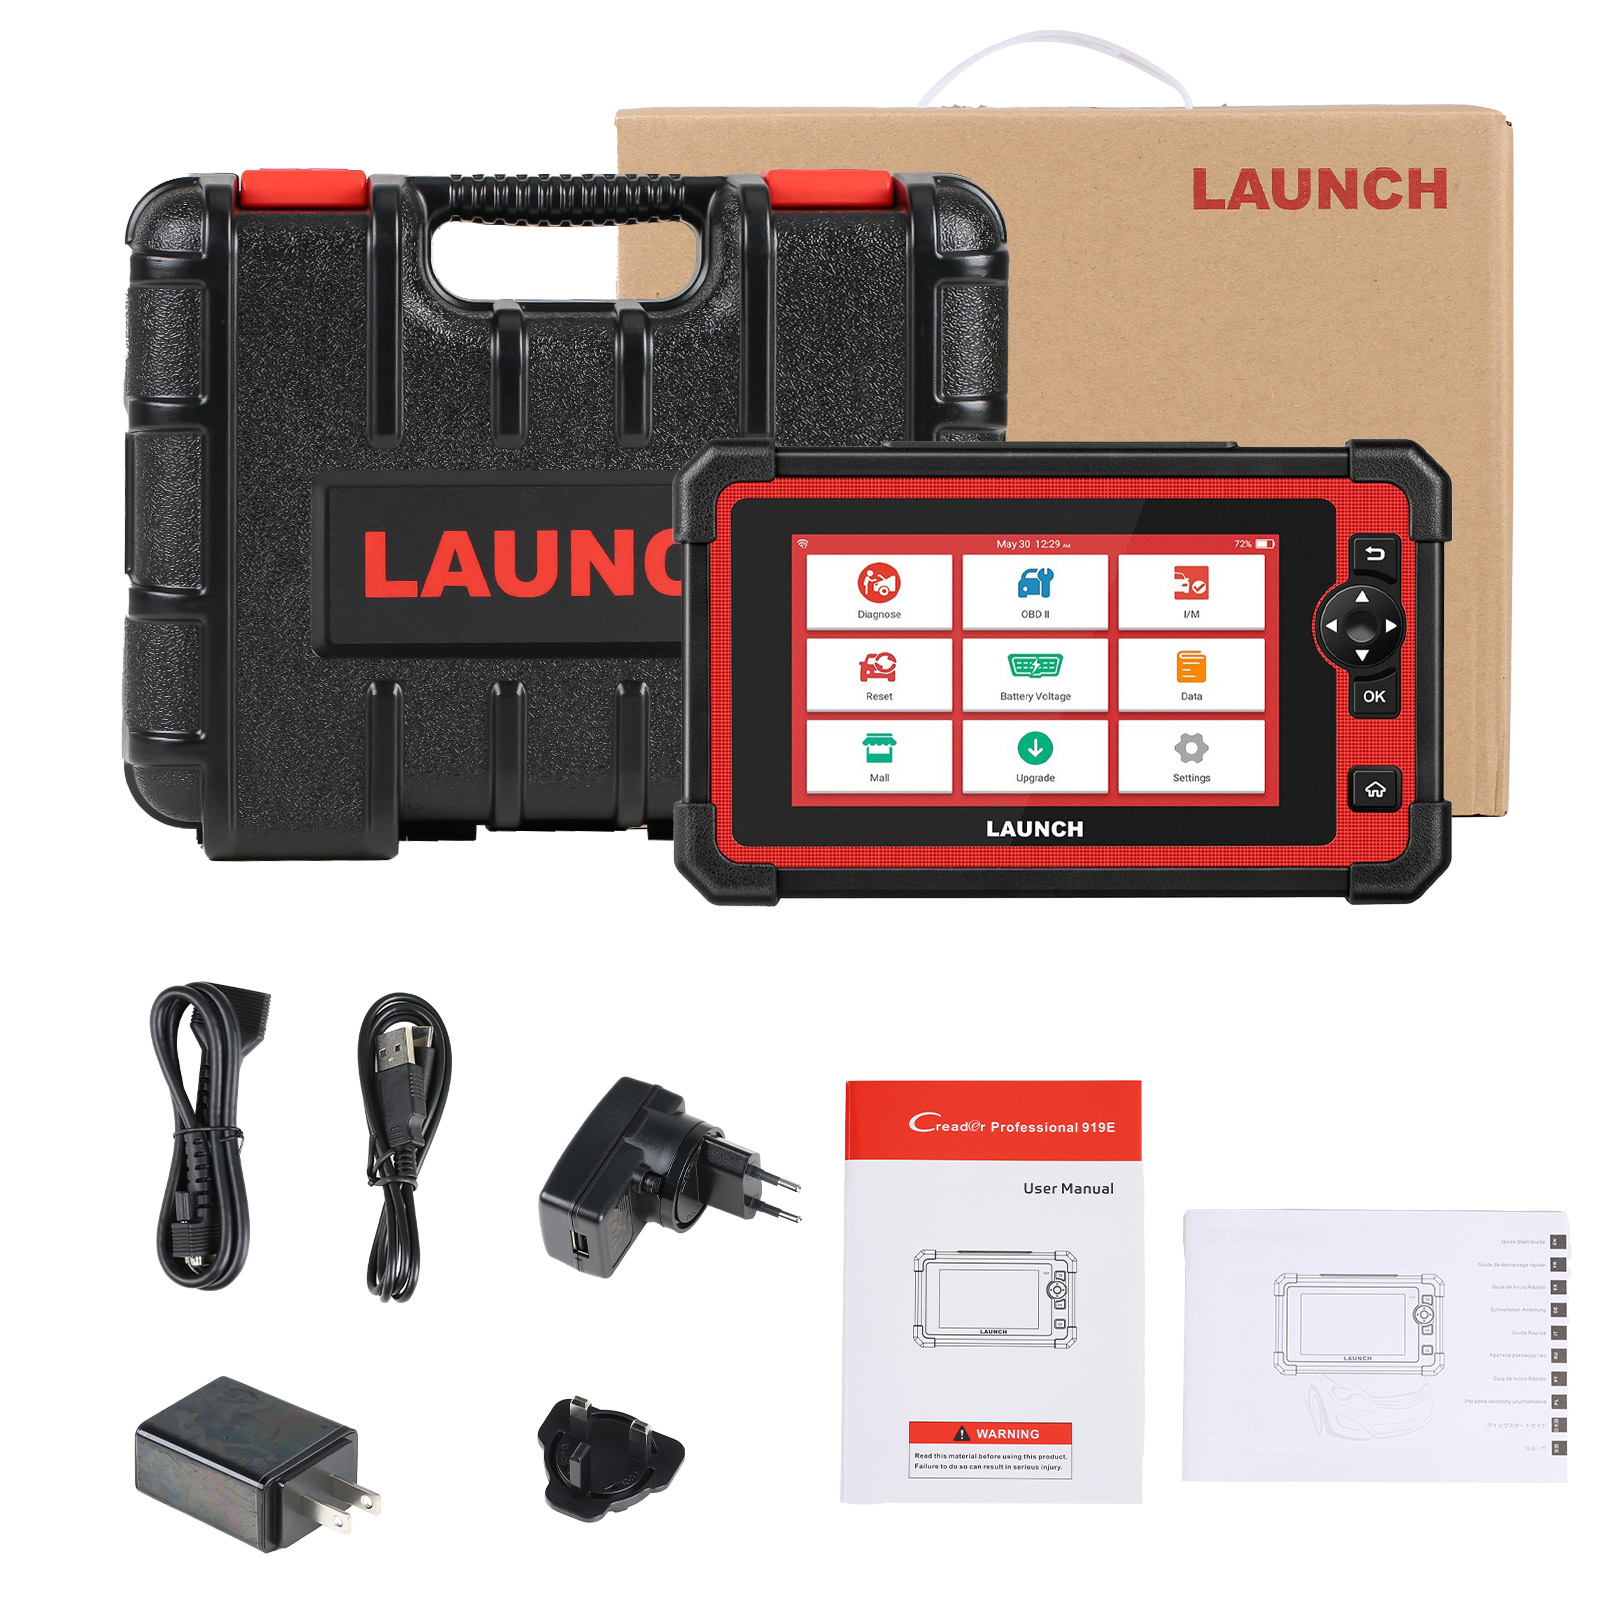 2 Years Free Update LAUNCH X431 CRP919E Full System Car Diagnostic Tools with 31+ Reset Service Auto OBD OBD2 Code Reader Scanner 2 Year Free Update EU & UK Version